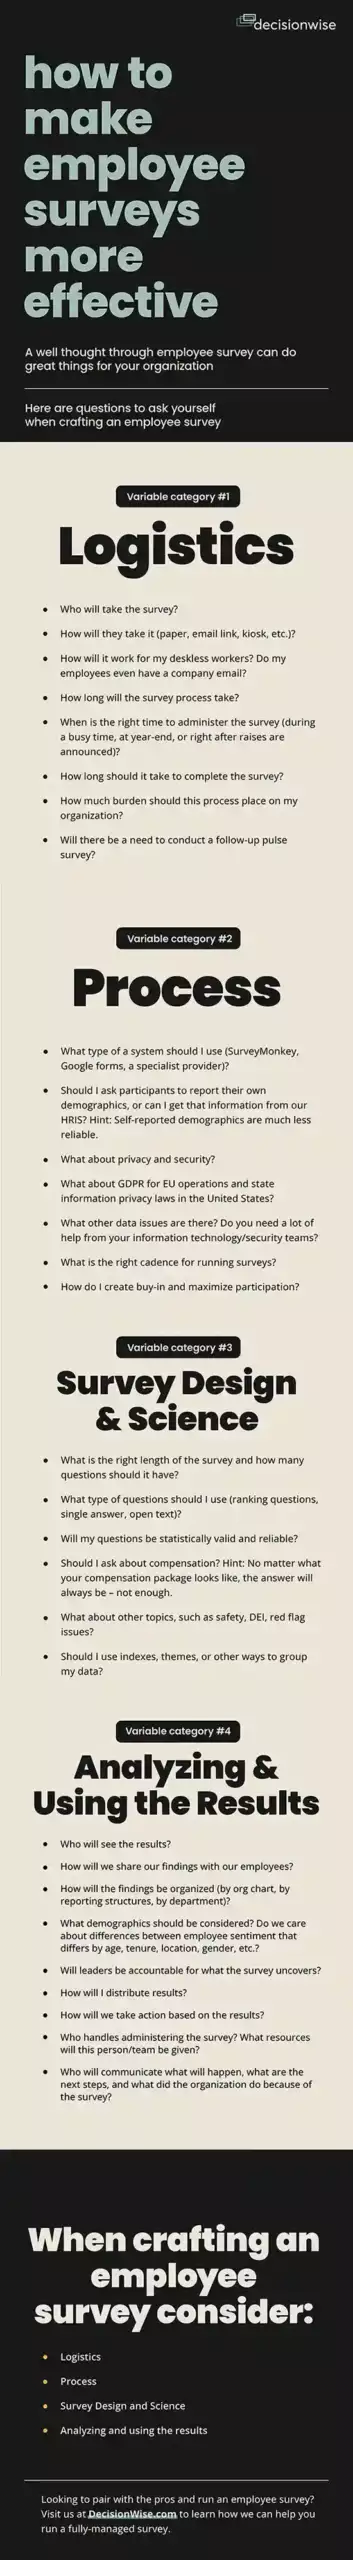 how to make employee surveys more effective infographic